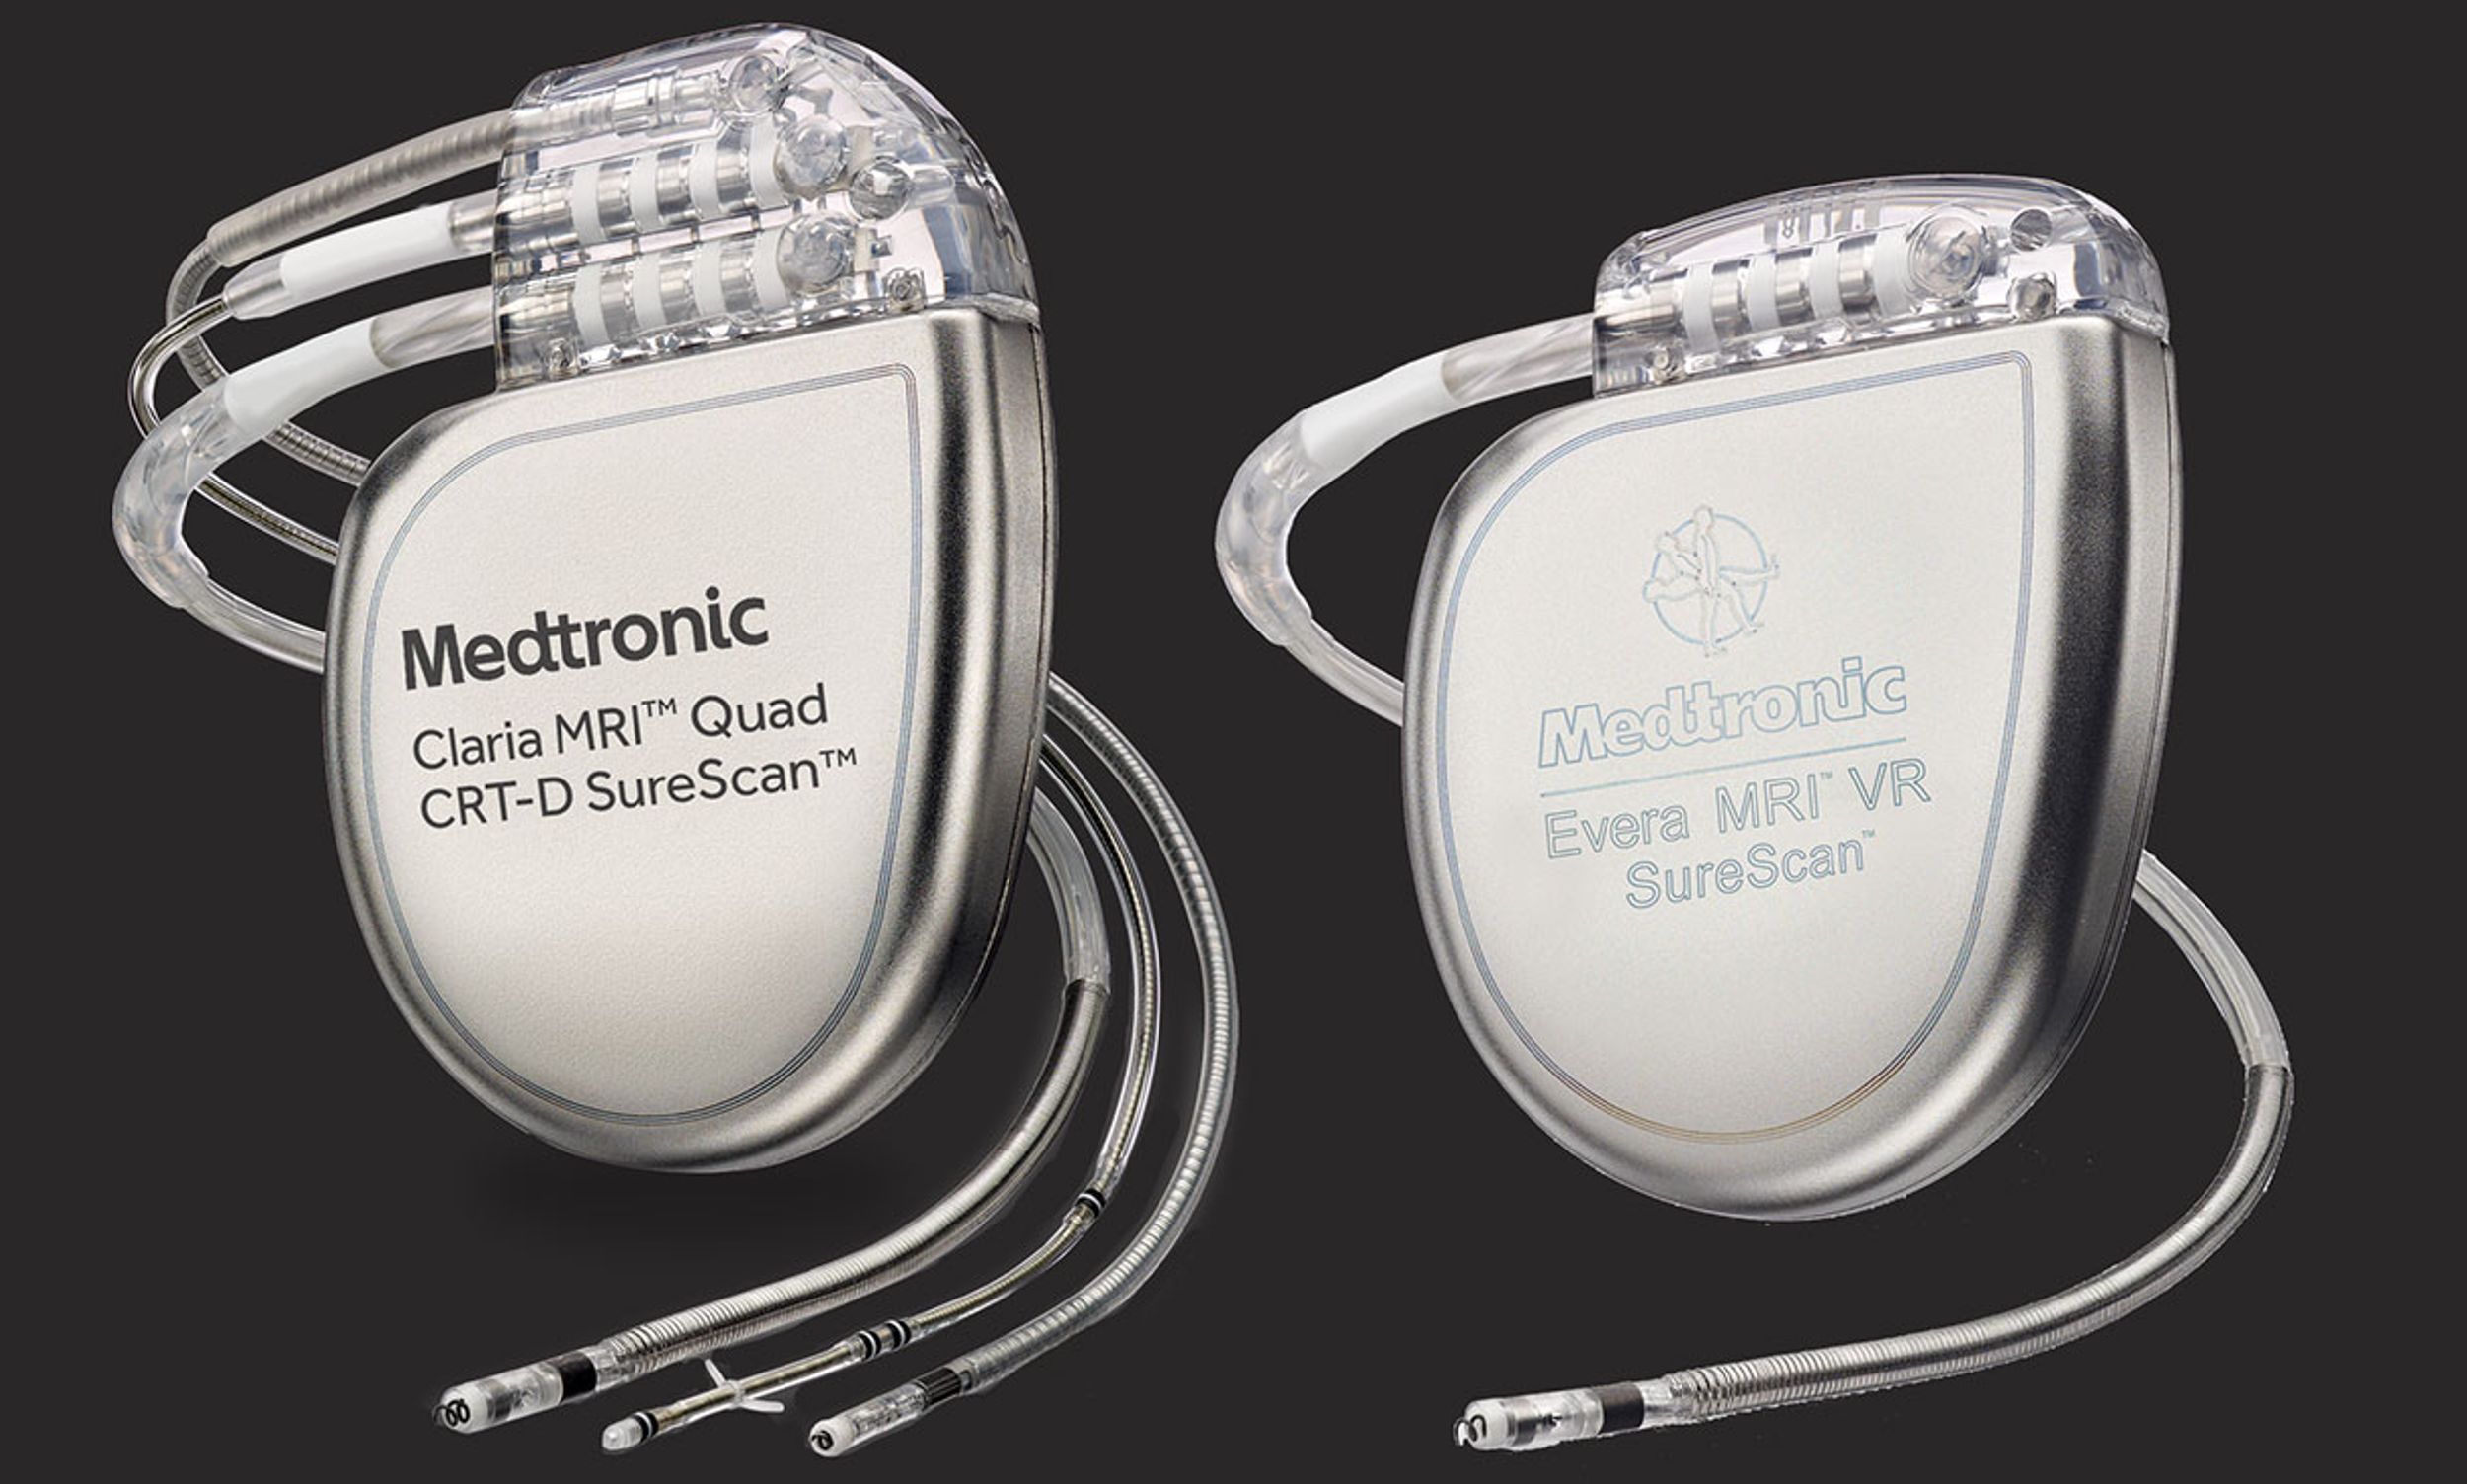 Photograph of two Medtronic devices.